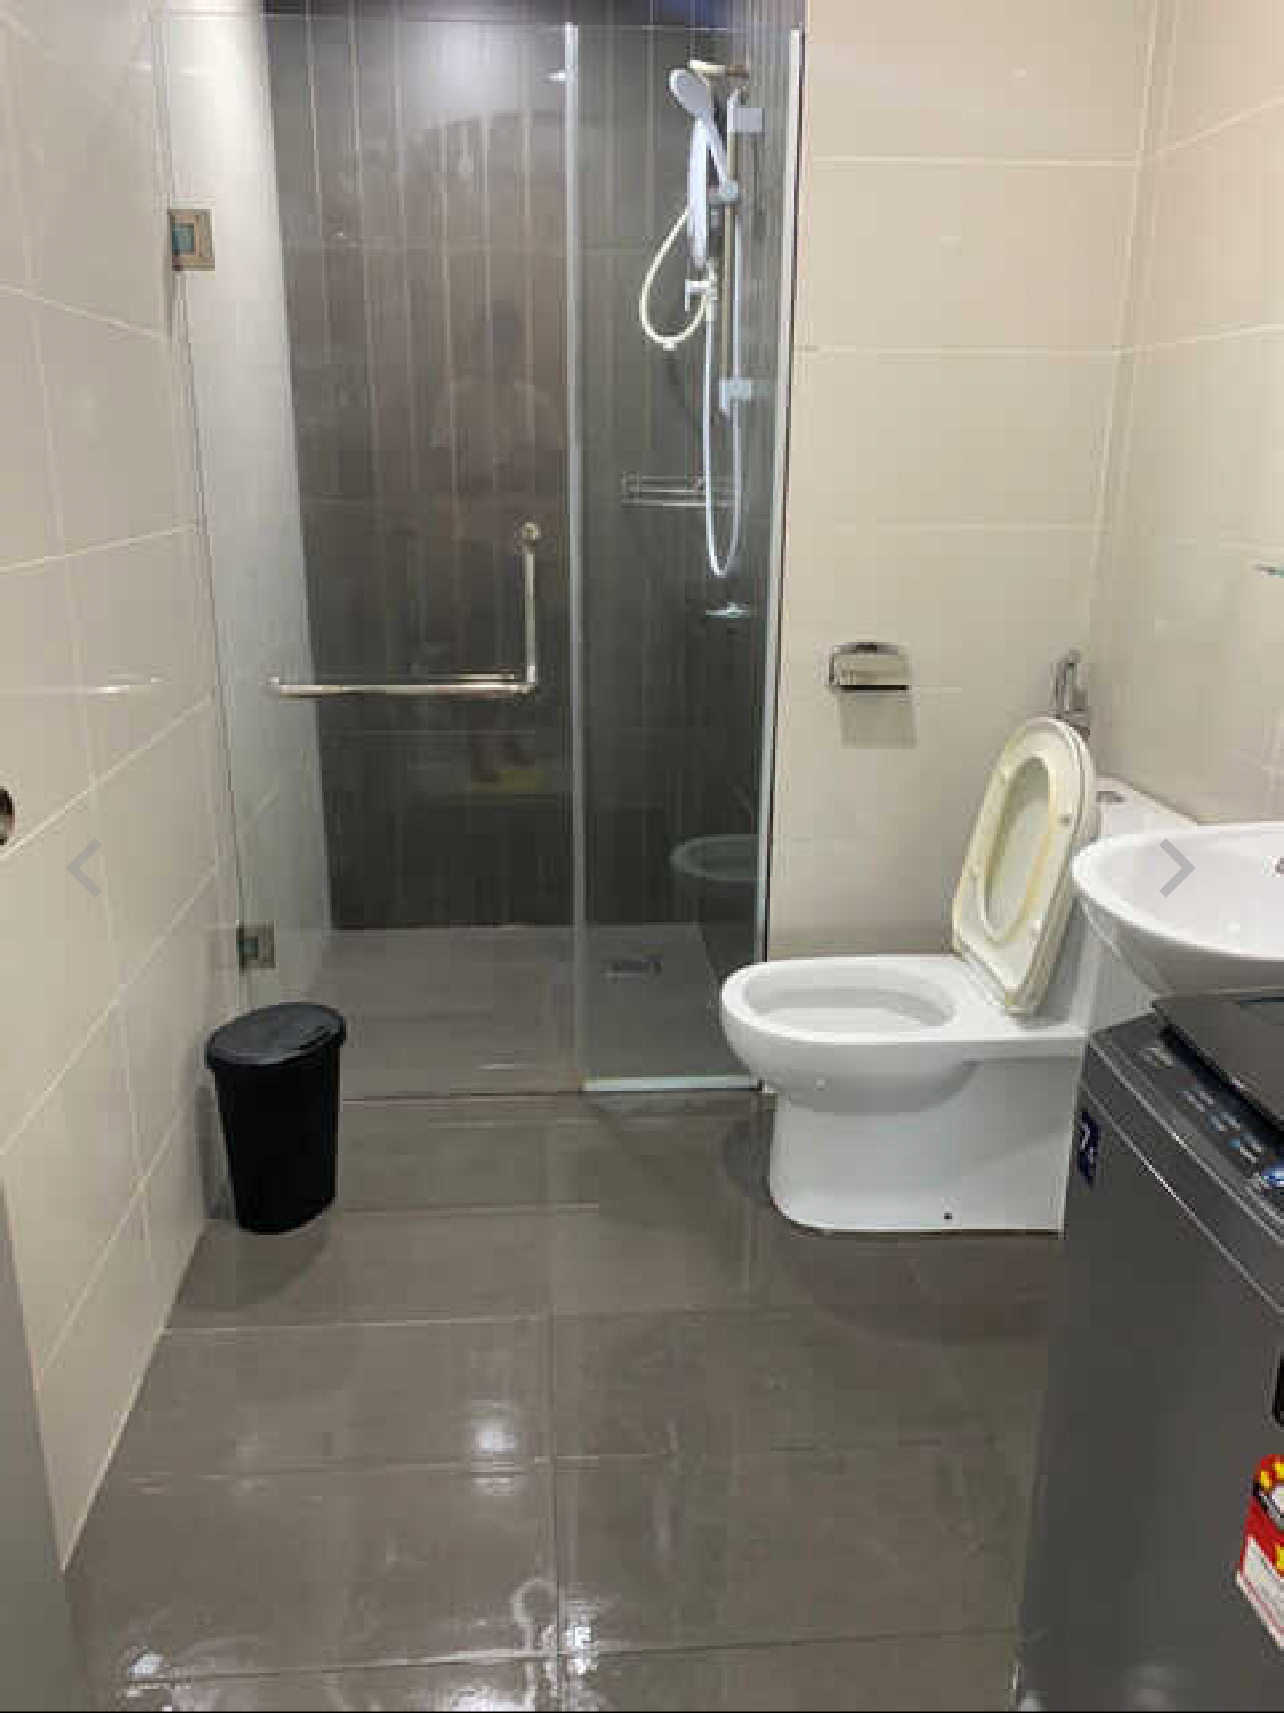 room for rent, studio, supermarket, Send the owner a message on WhatsApp/facebook if you want to RENT the unit facebook (Mohammed Nhat)&Telegram(@muhammednhat101) Fully furnished non sharing :(comfortable)